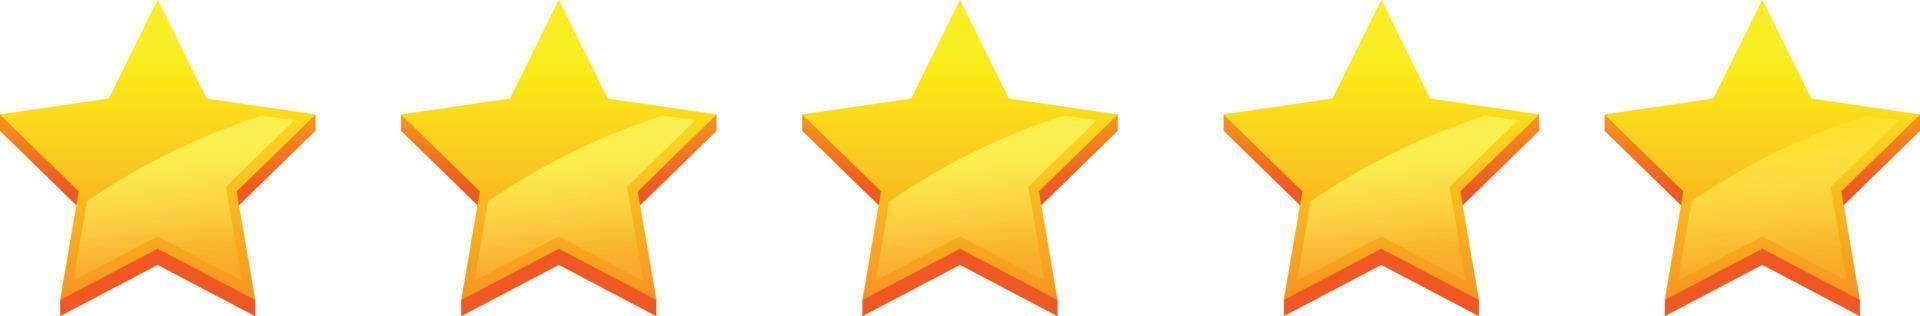 Five stars rating gold color icon vector